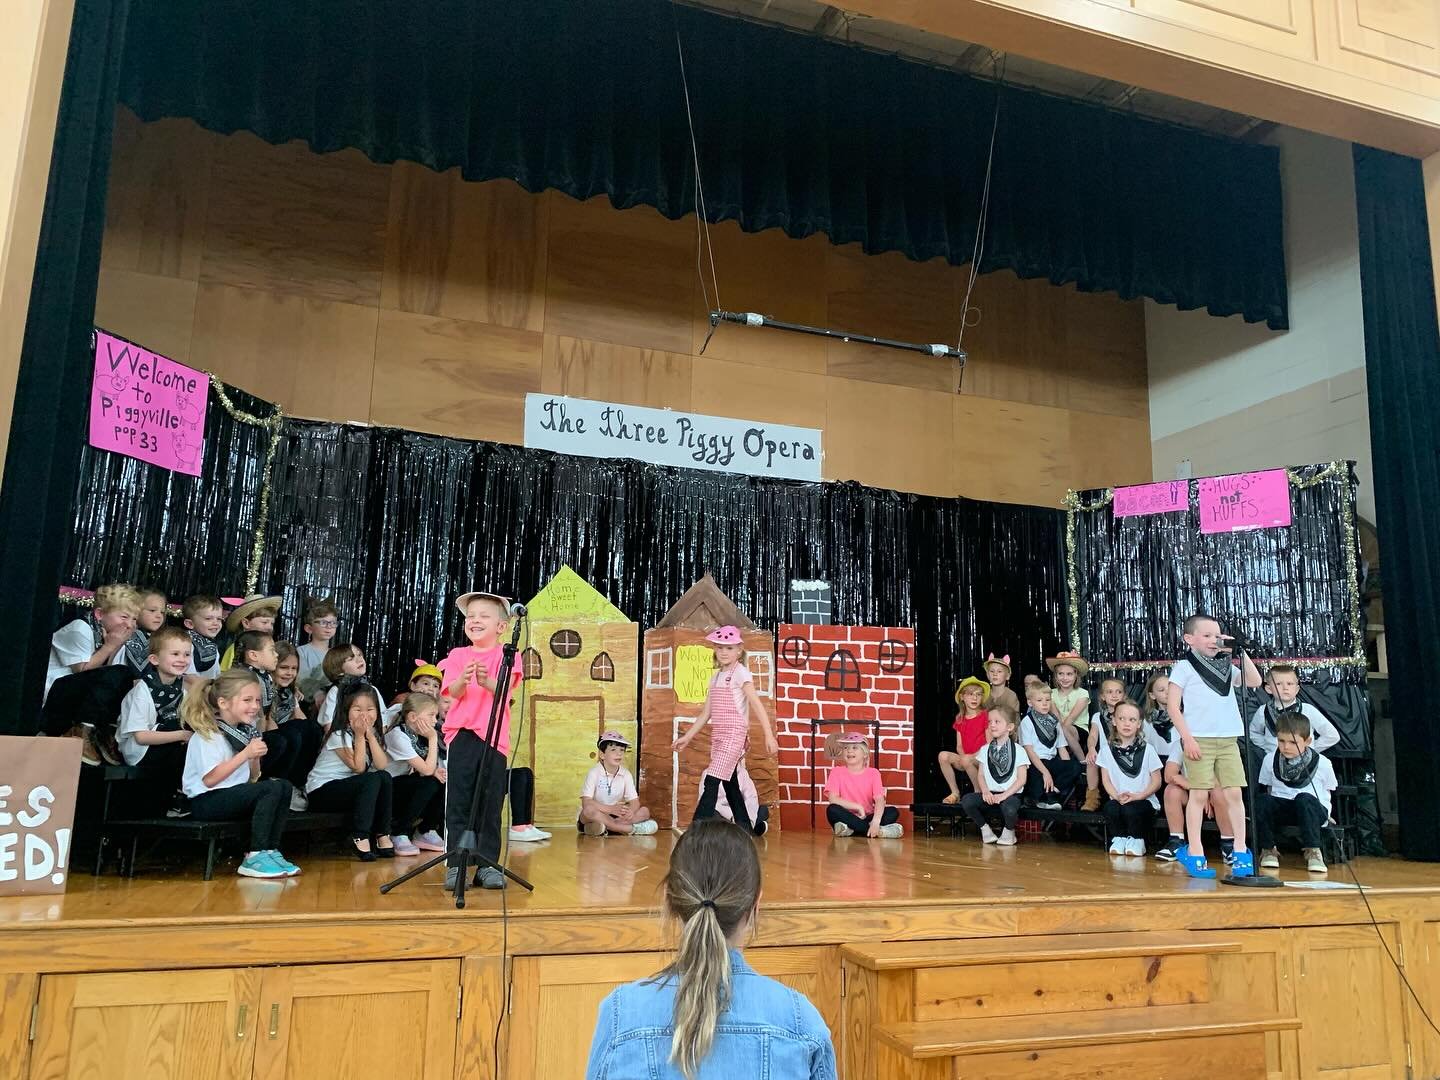 Our Kindergartners entertained us with their performance of the &ldquo;The Three Piggy Opera&rdquo; tonight!